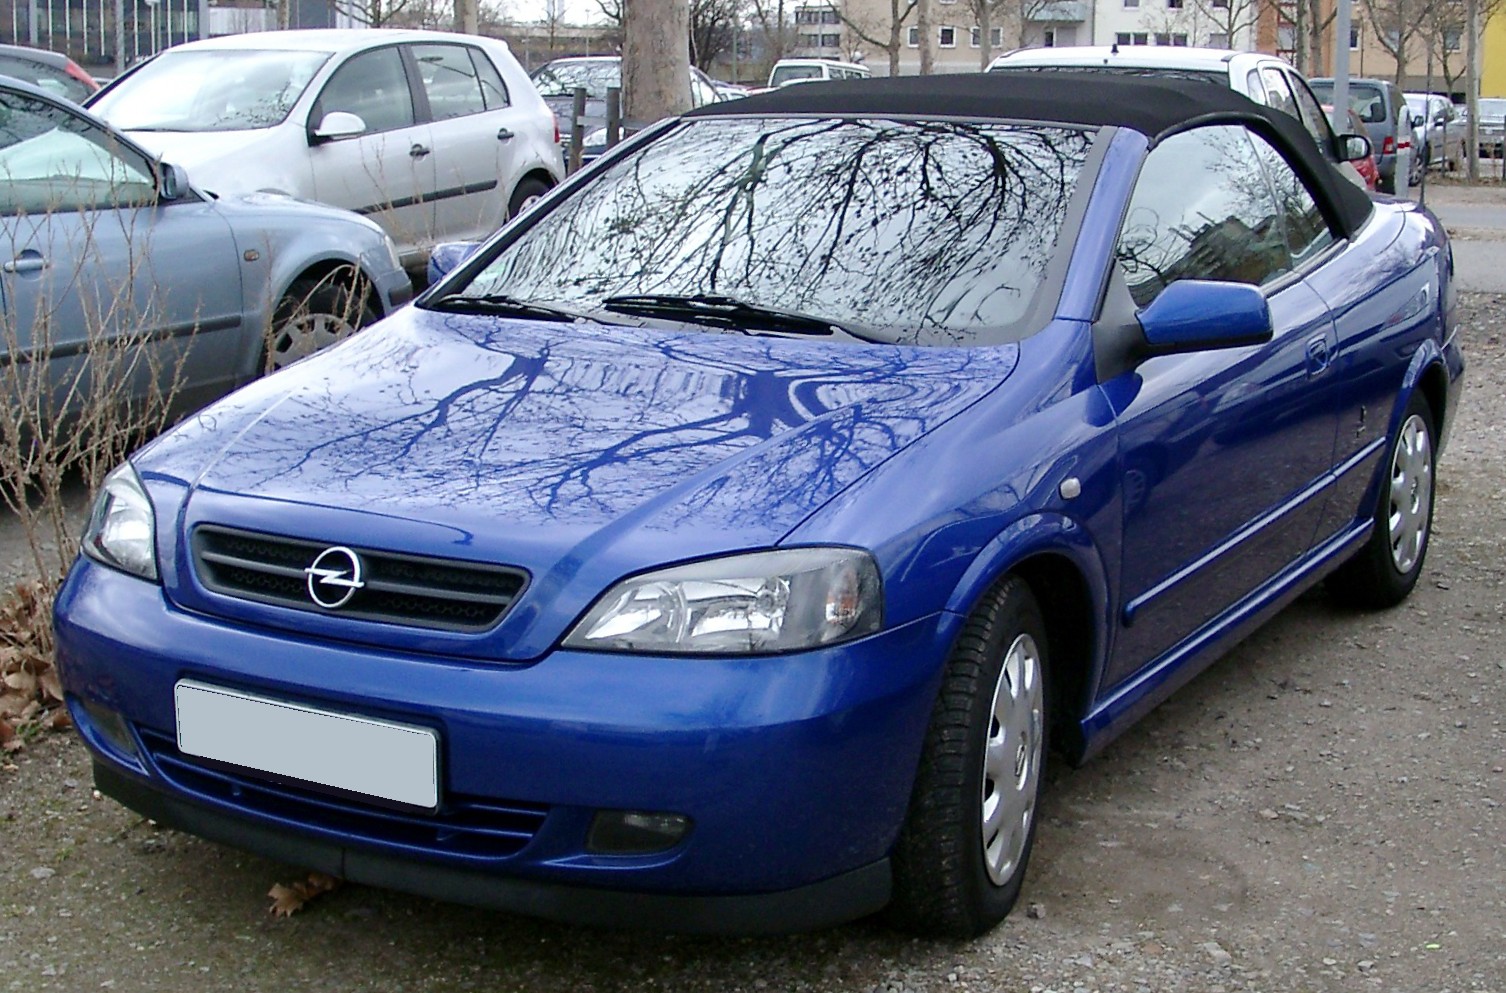 Opel astra cabrio (296 comments) Views 11407 Rating 89